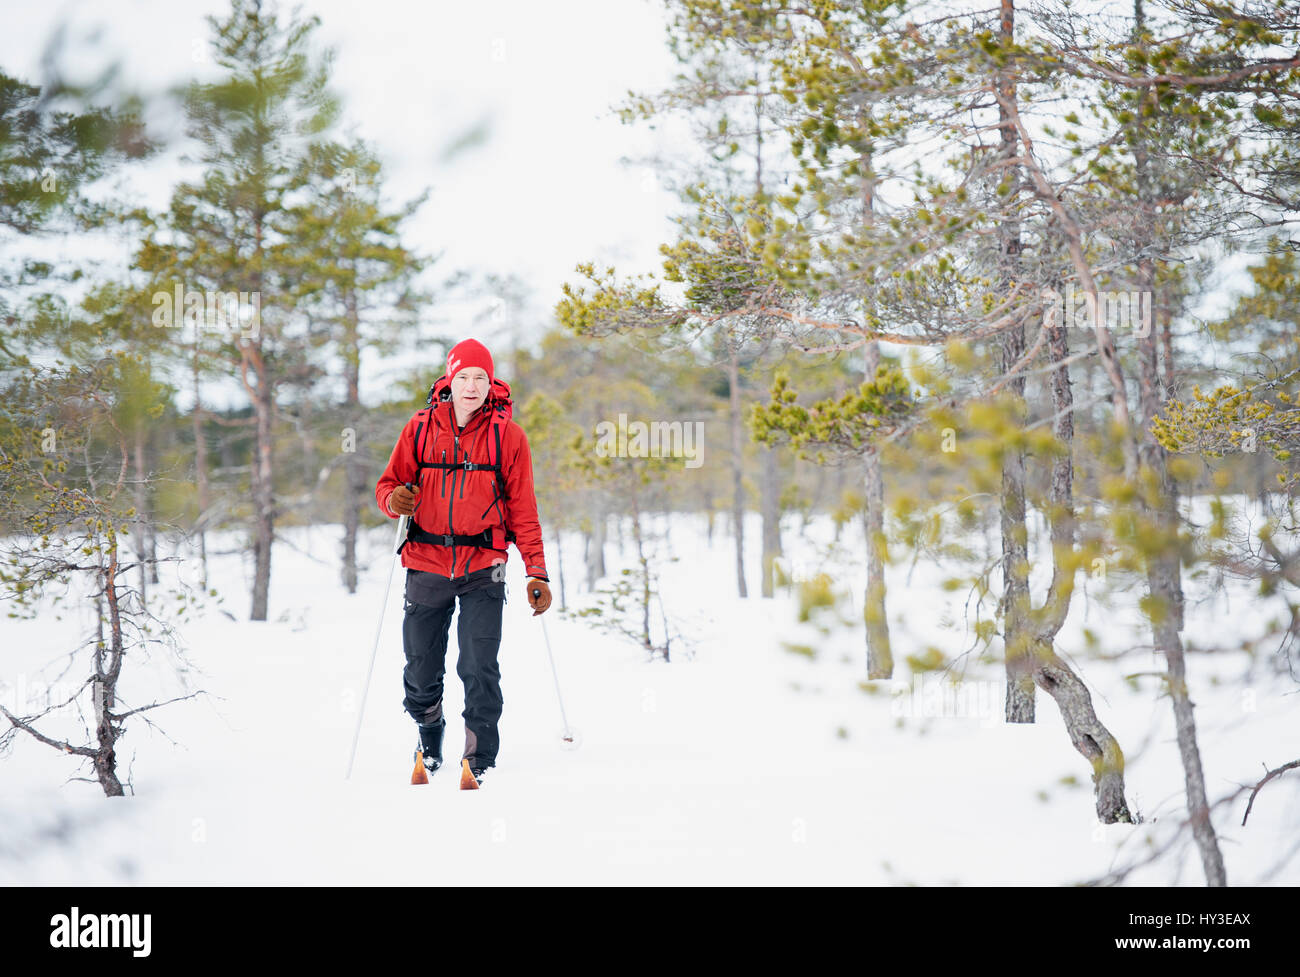 Page 3 - Bergslagen High Resolution Stock Photography and Images - Alamy